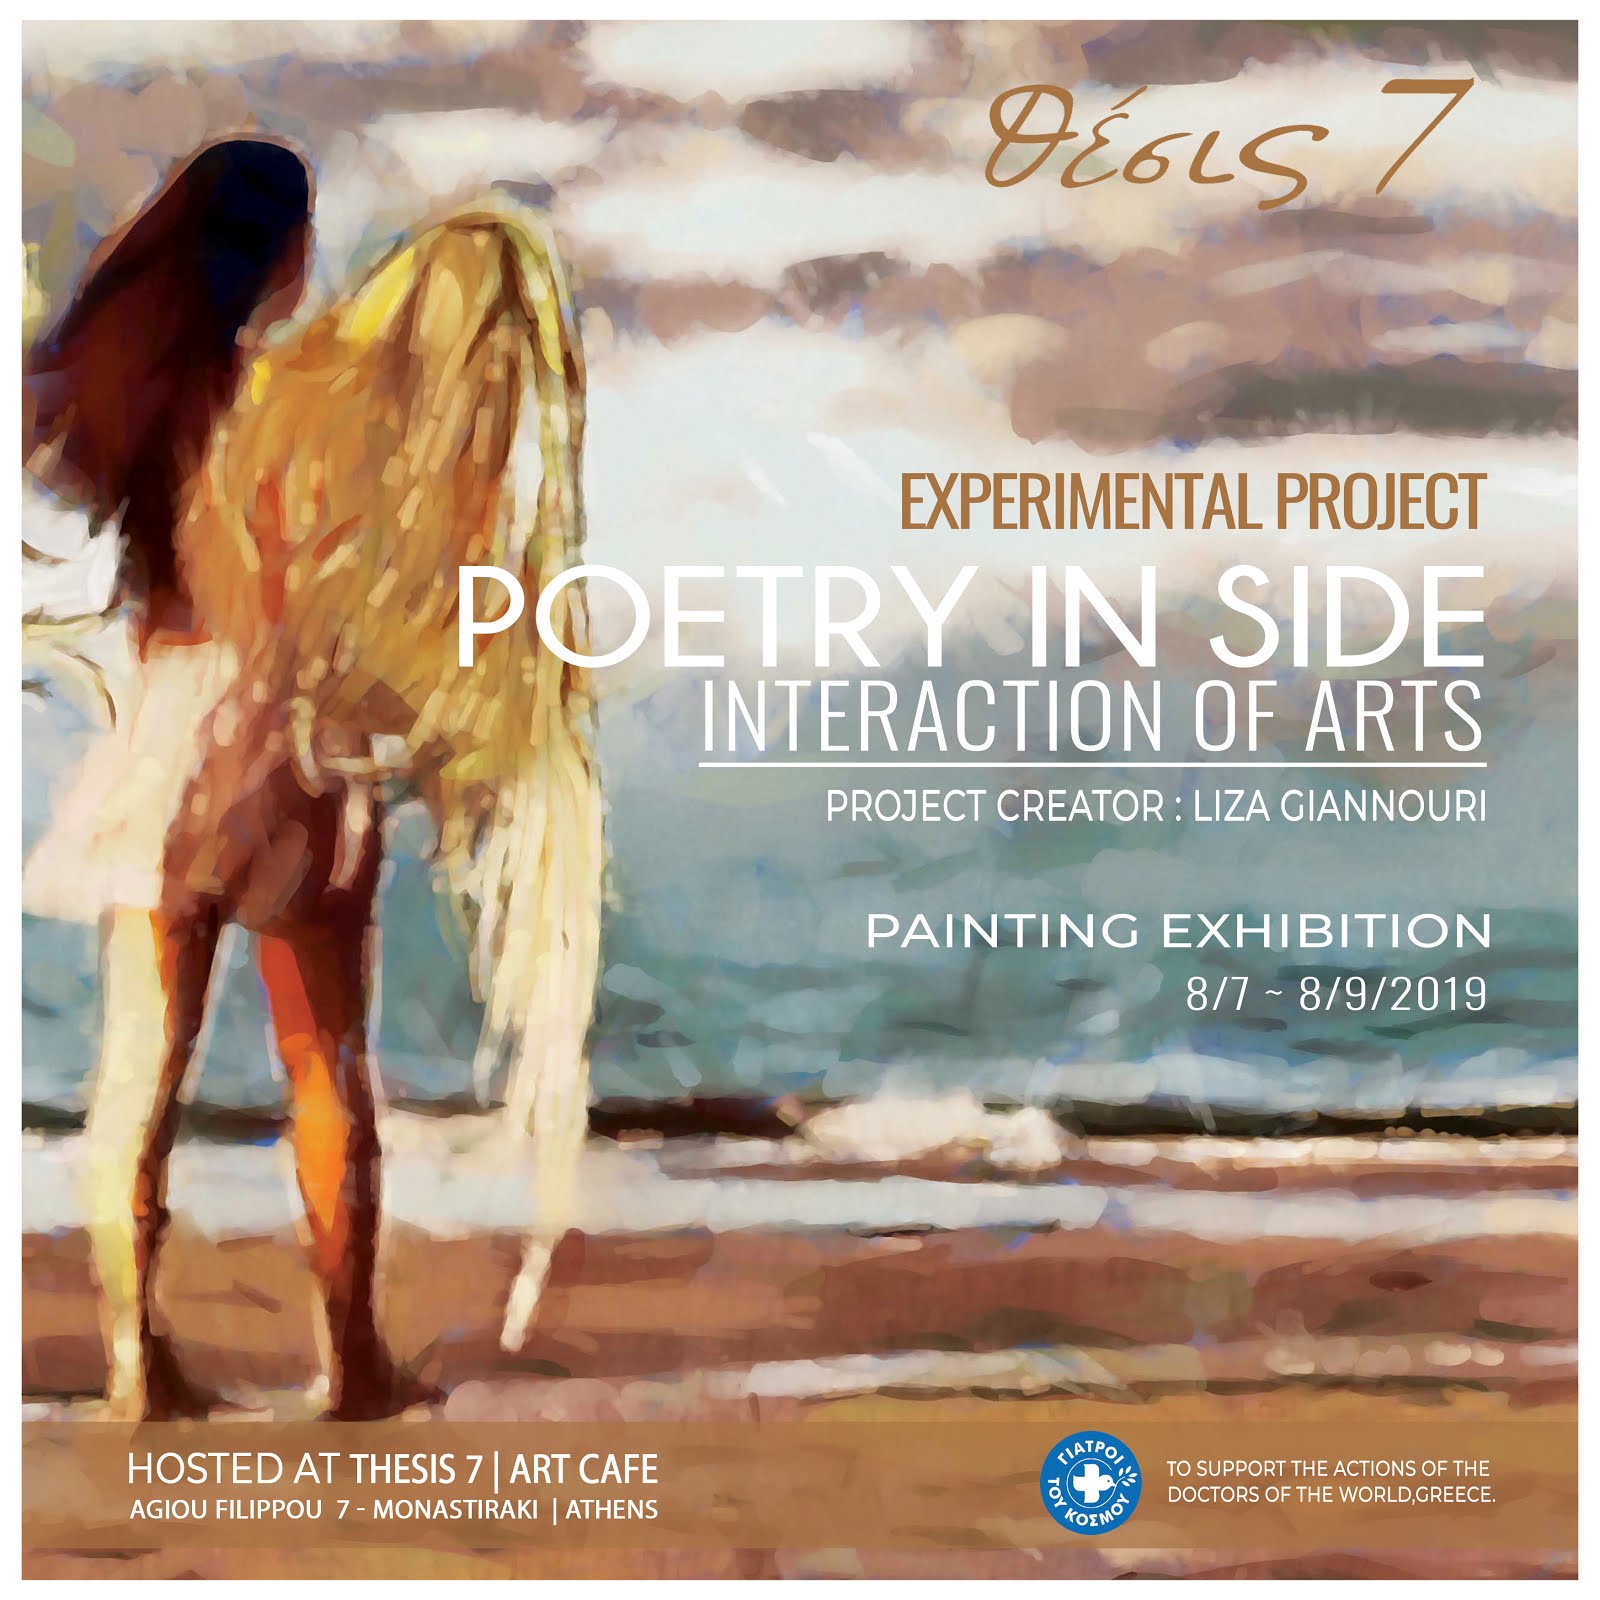 EXPERIMENTAL PROJECT  - POETRY IN SIDE |INTERACTION OF ARTS